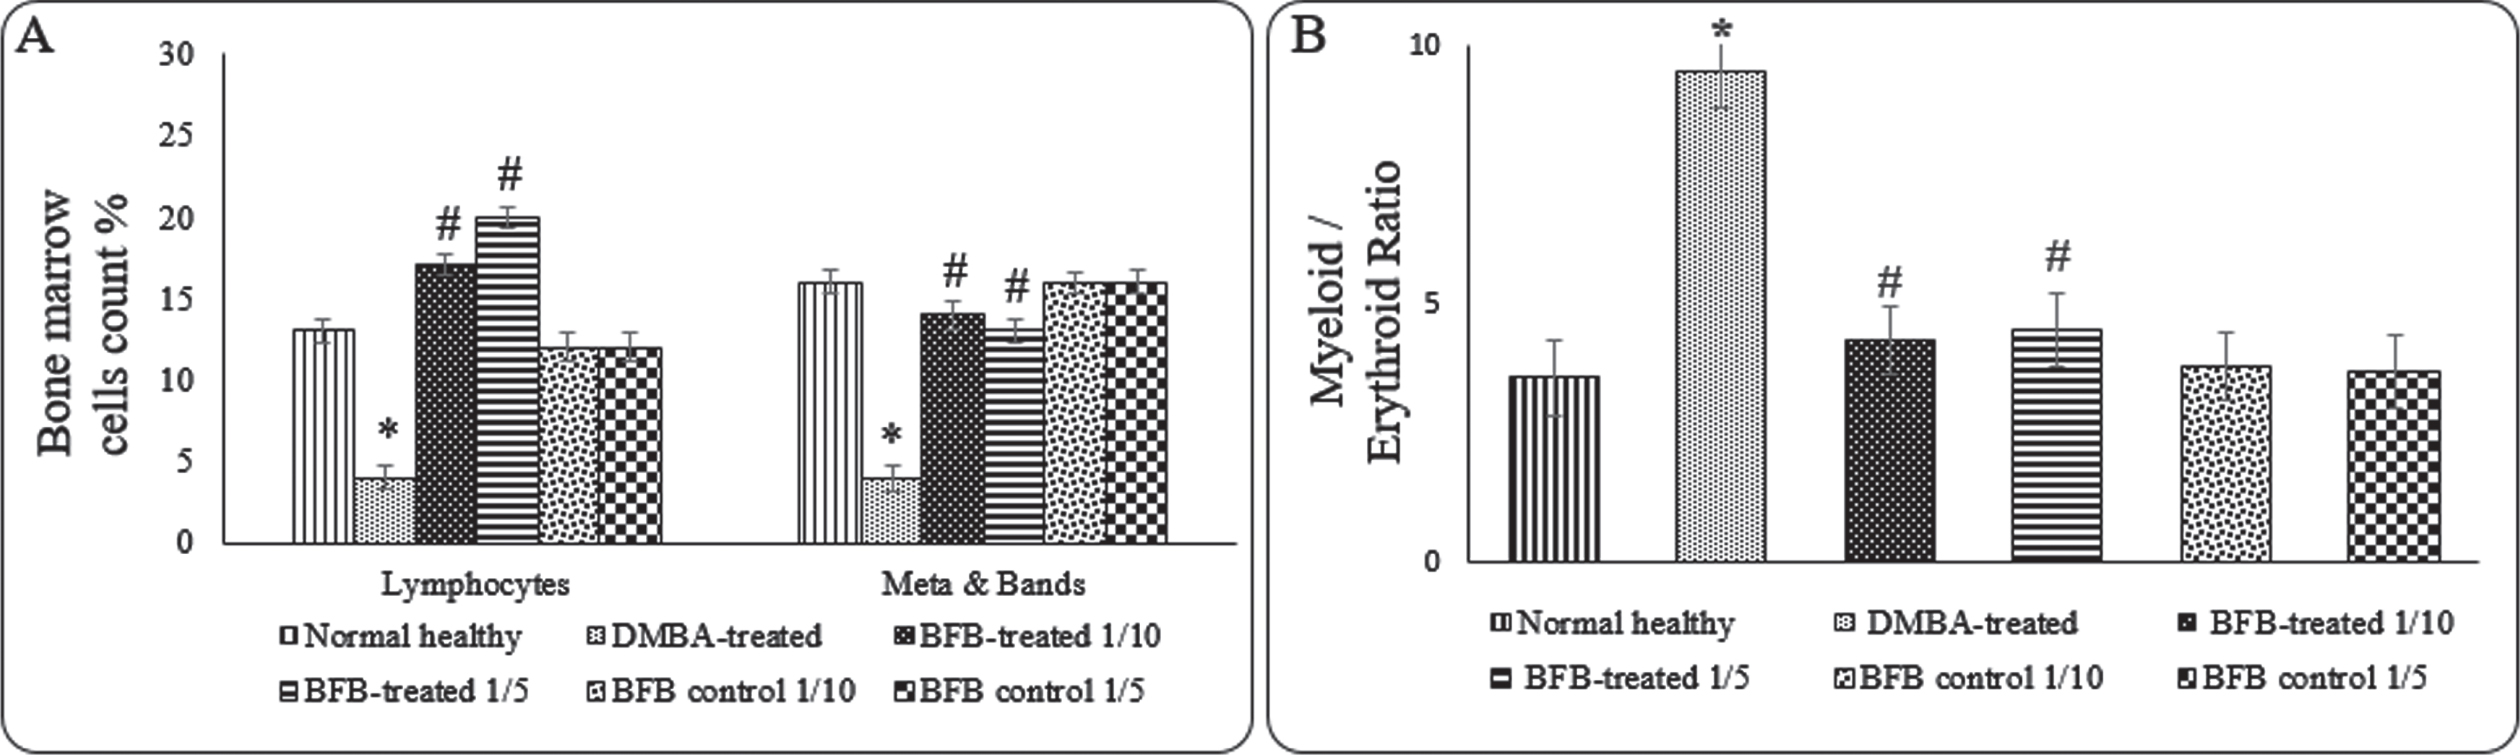 Effect of treatments on BM hematological cells count A) Lymphocytes and Metamyelocyte & Band cells, B) Myeloid / Erythroid ratio. Data are represented as Mean±SD, n = 10. (*) denotes significance (p < 0.05) against normal control, (#) denotes significance (p < 0.05) against DMBA-treated group. Data are represented as Mean±SD (standard deviation), (*) denotes significance (p < 0.05) against normal healthy control, (#) denotes significance (p < 0.05) against DMBA-treated positive control.